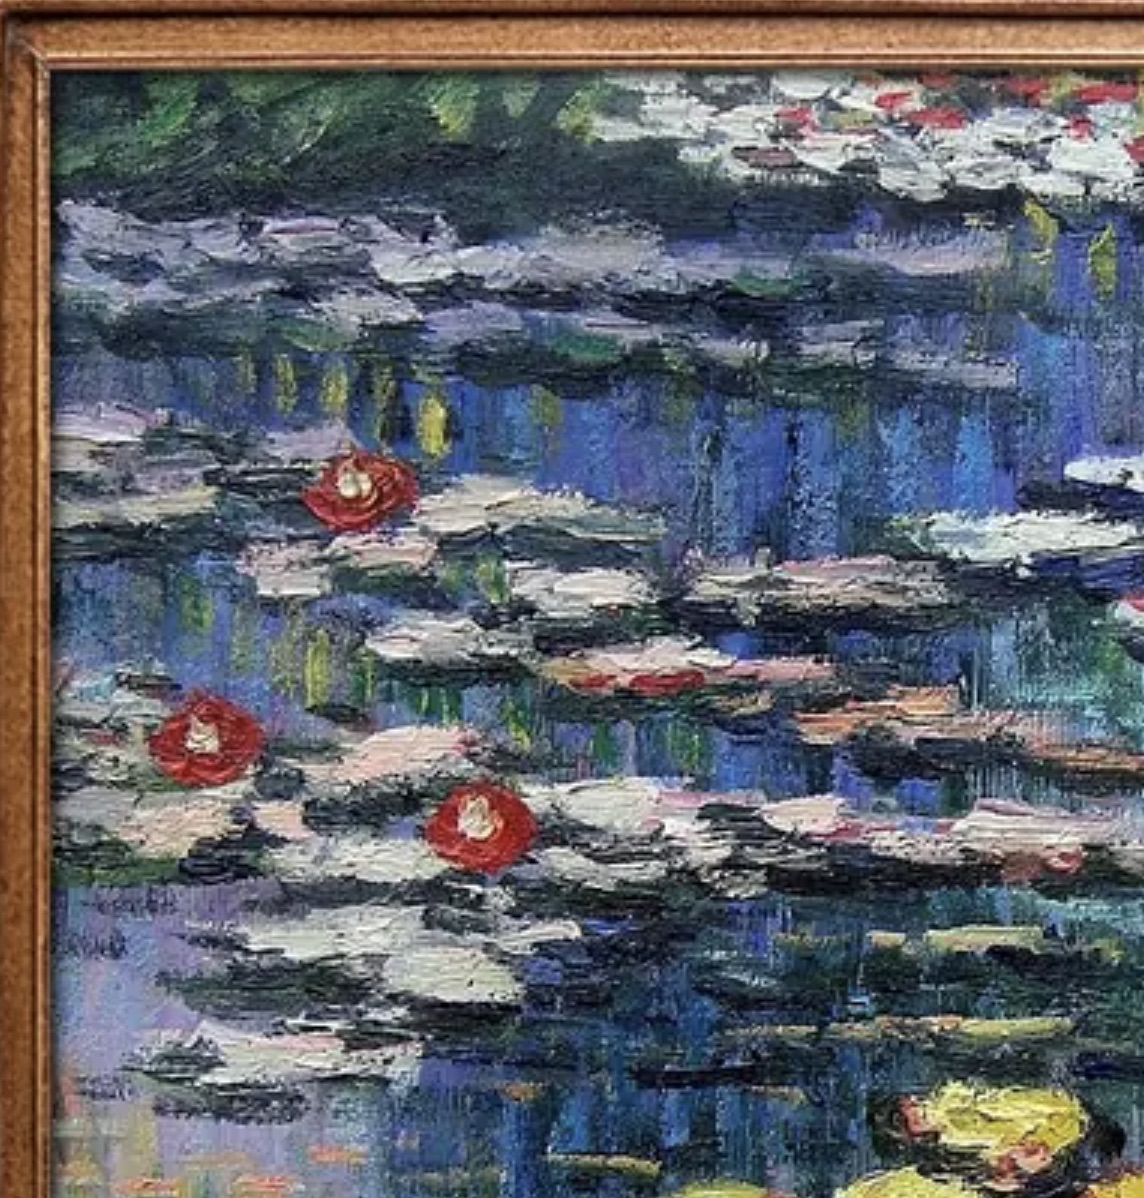 Claude Monet "Water Lilies" Oil Painting, After - Image 3 of 6